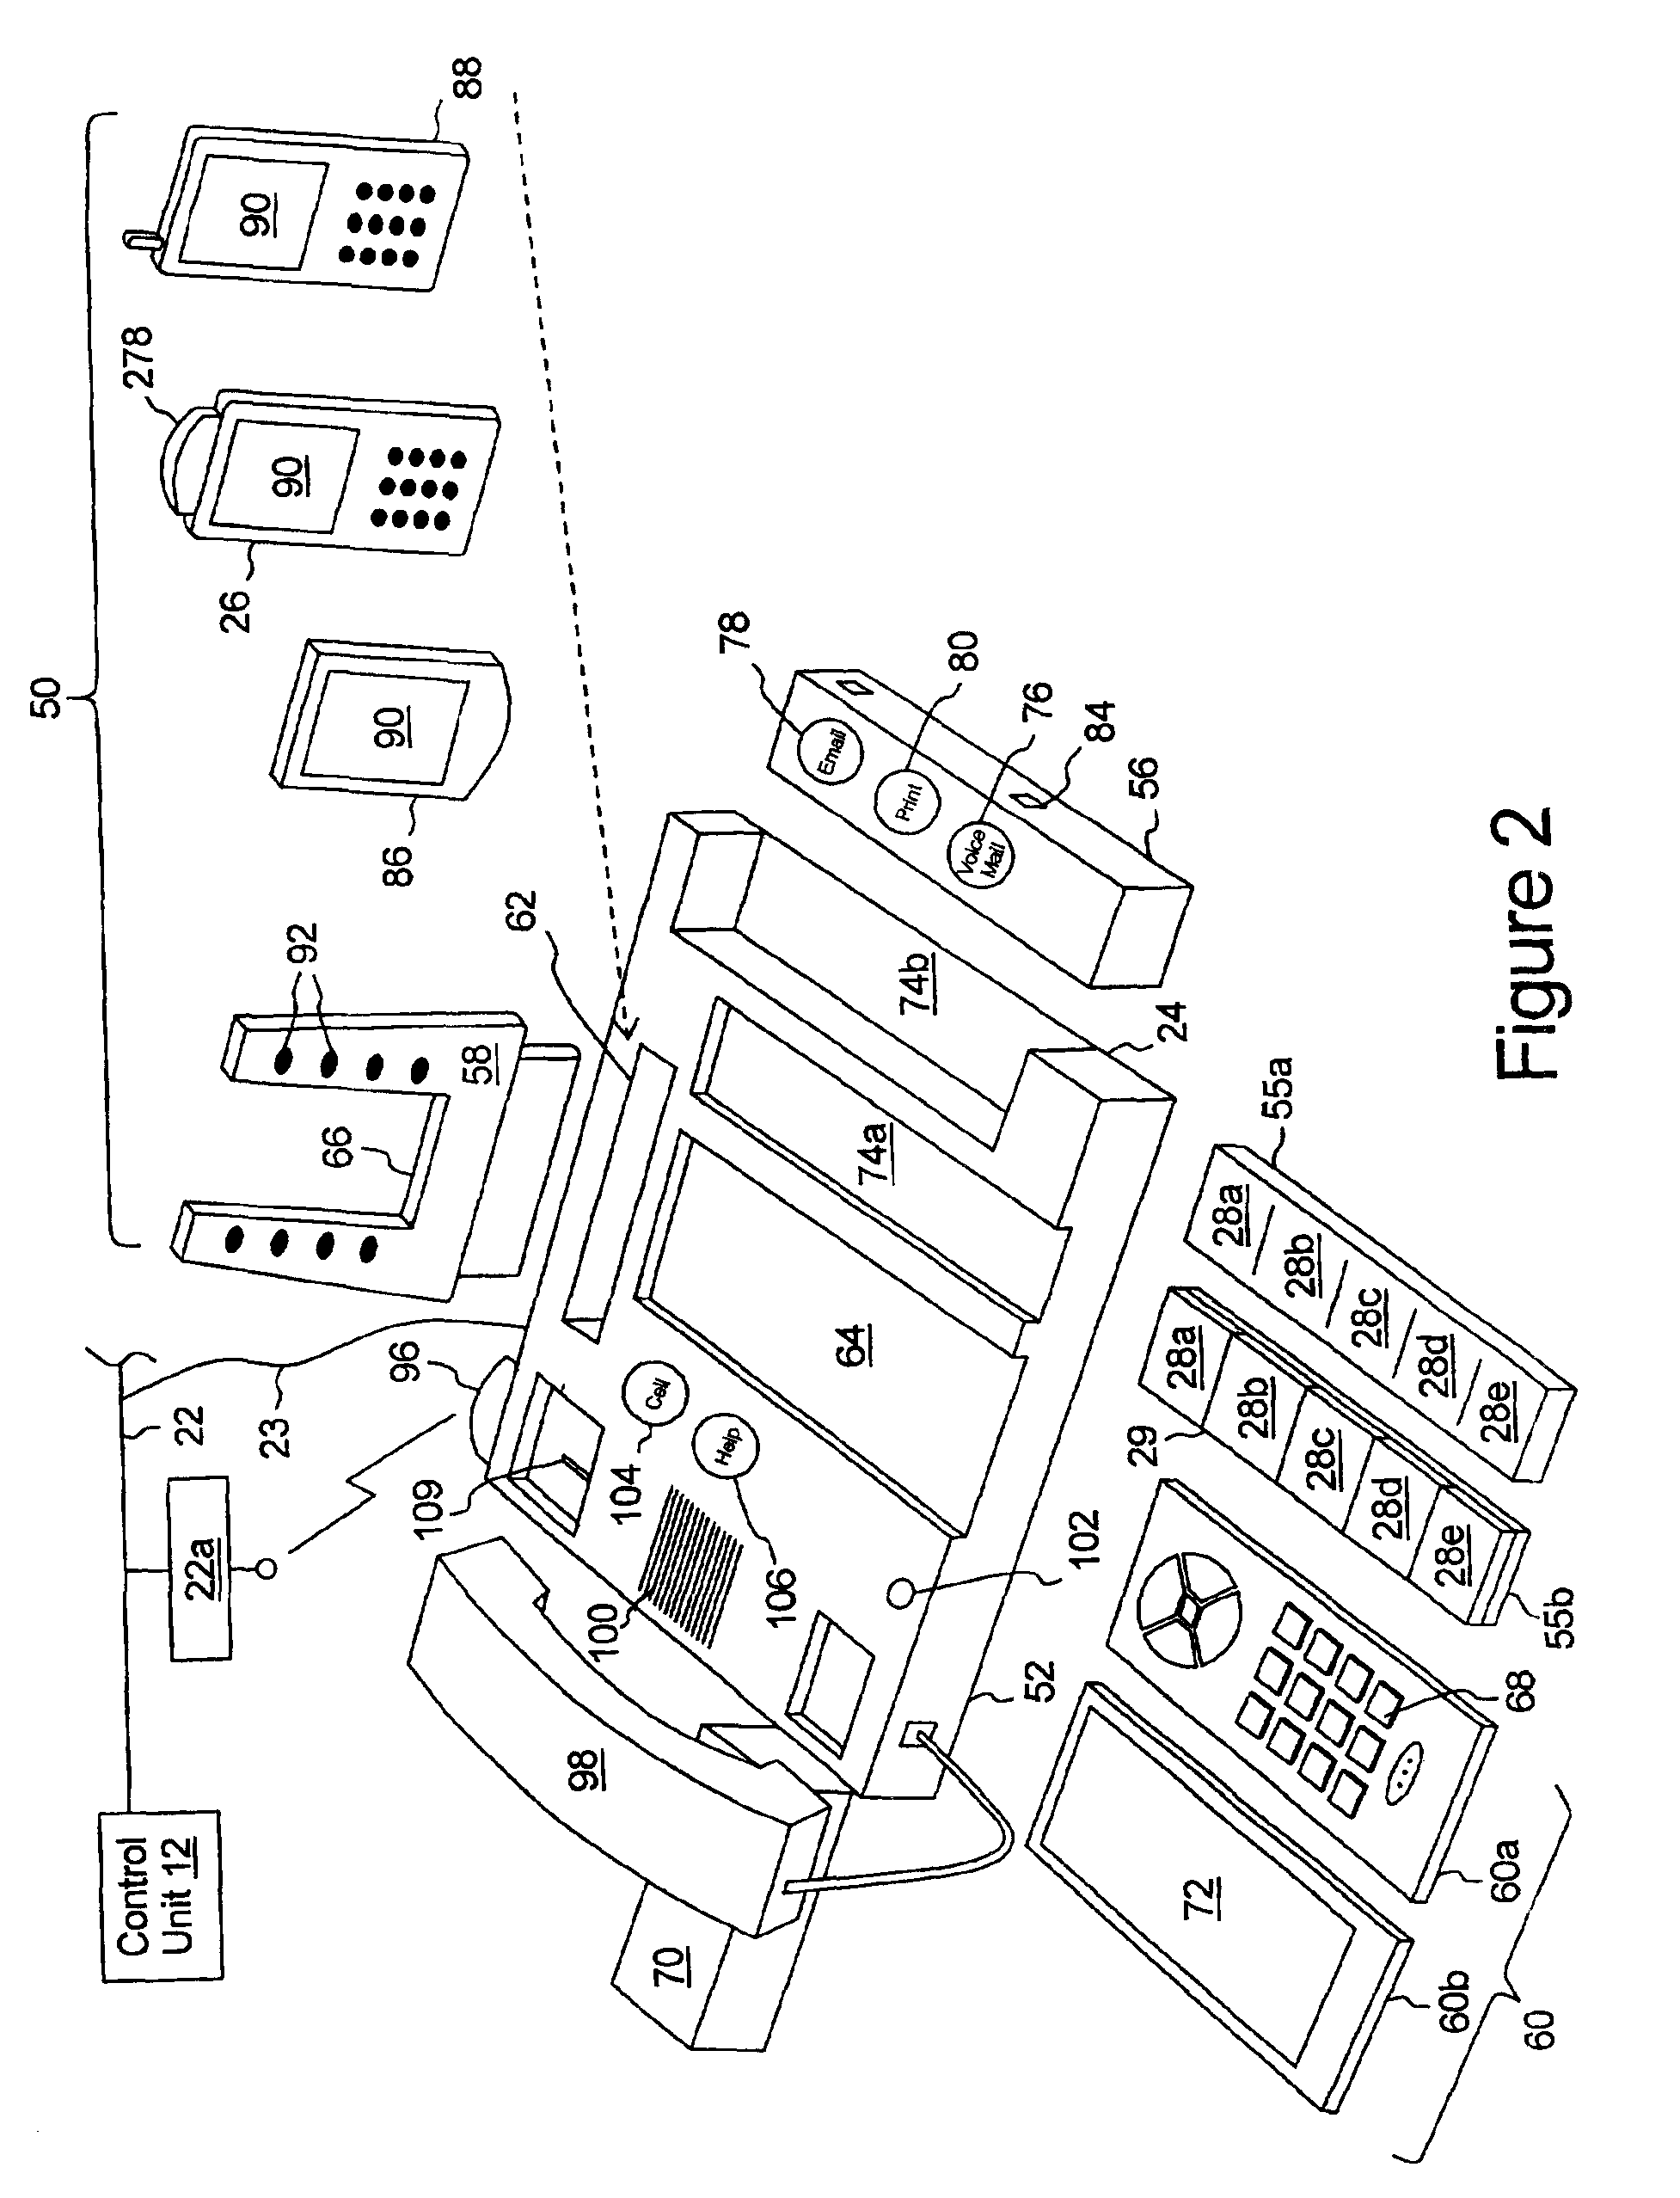 Multi-media communication system having programmable speed dial control indicia